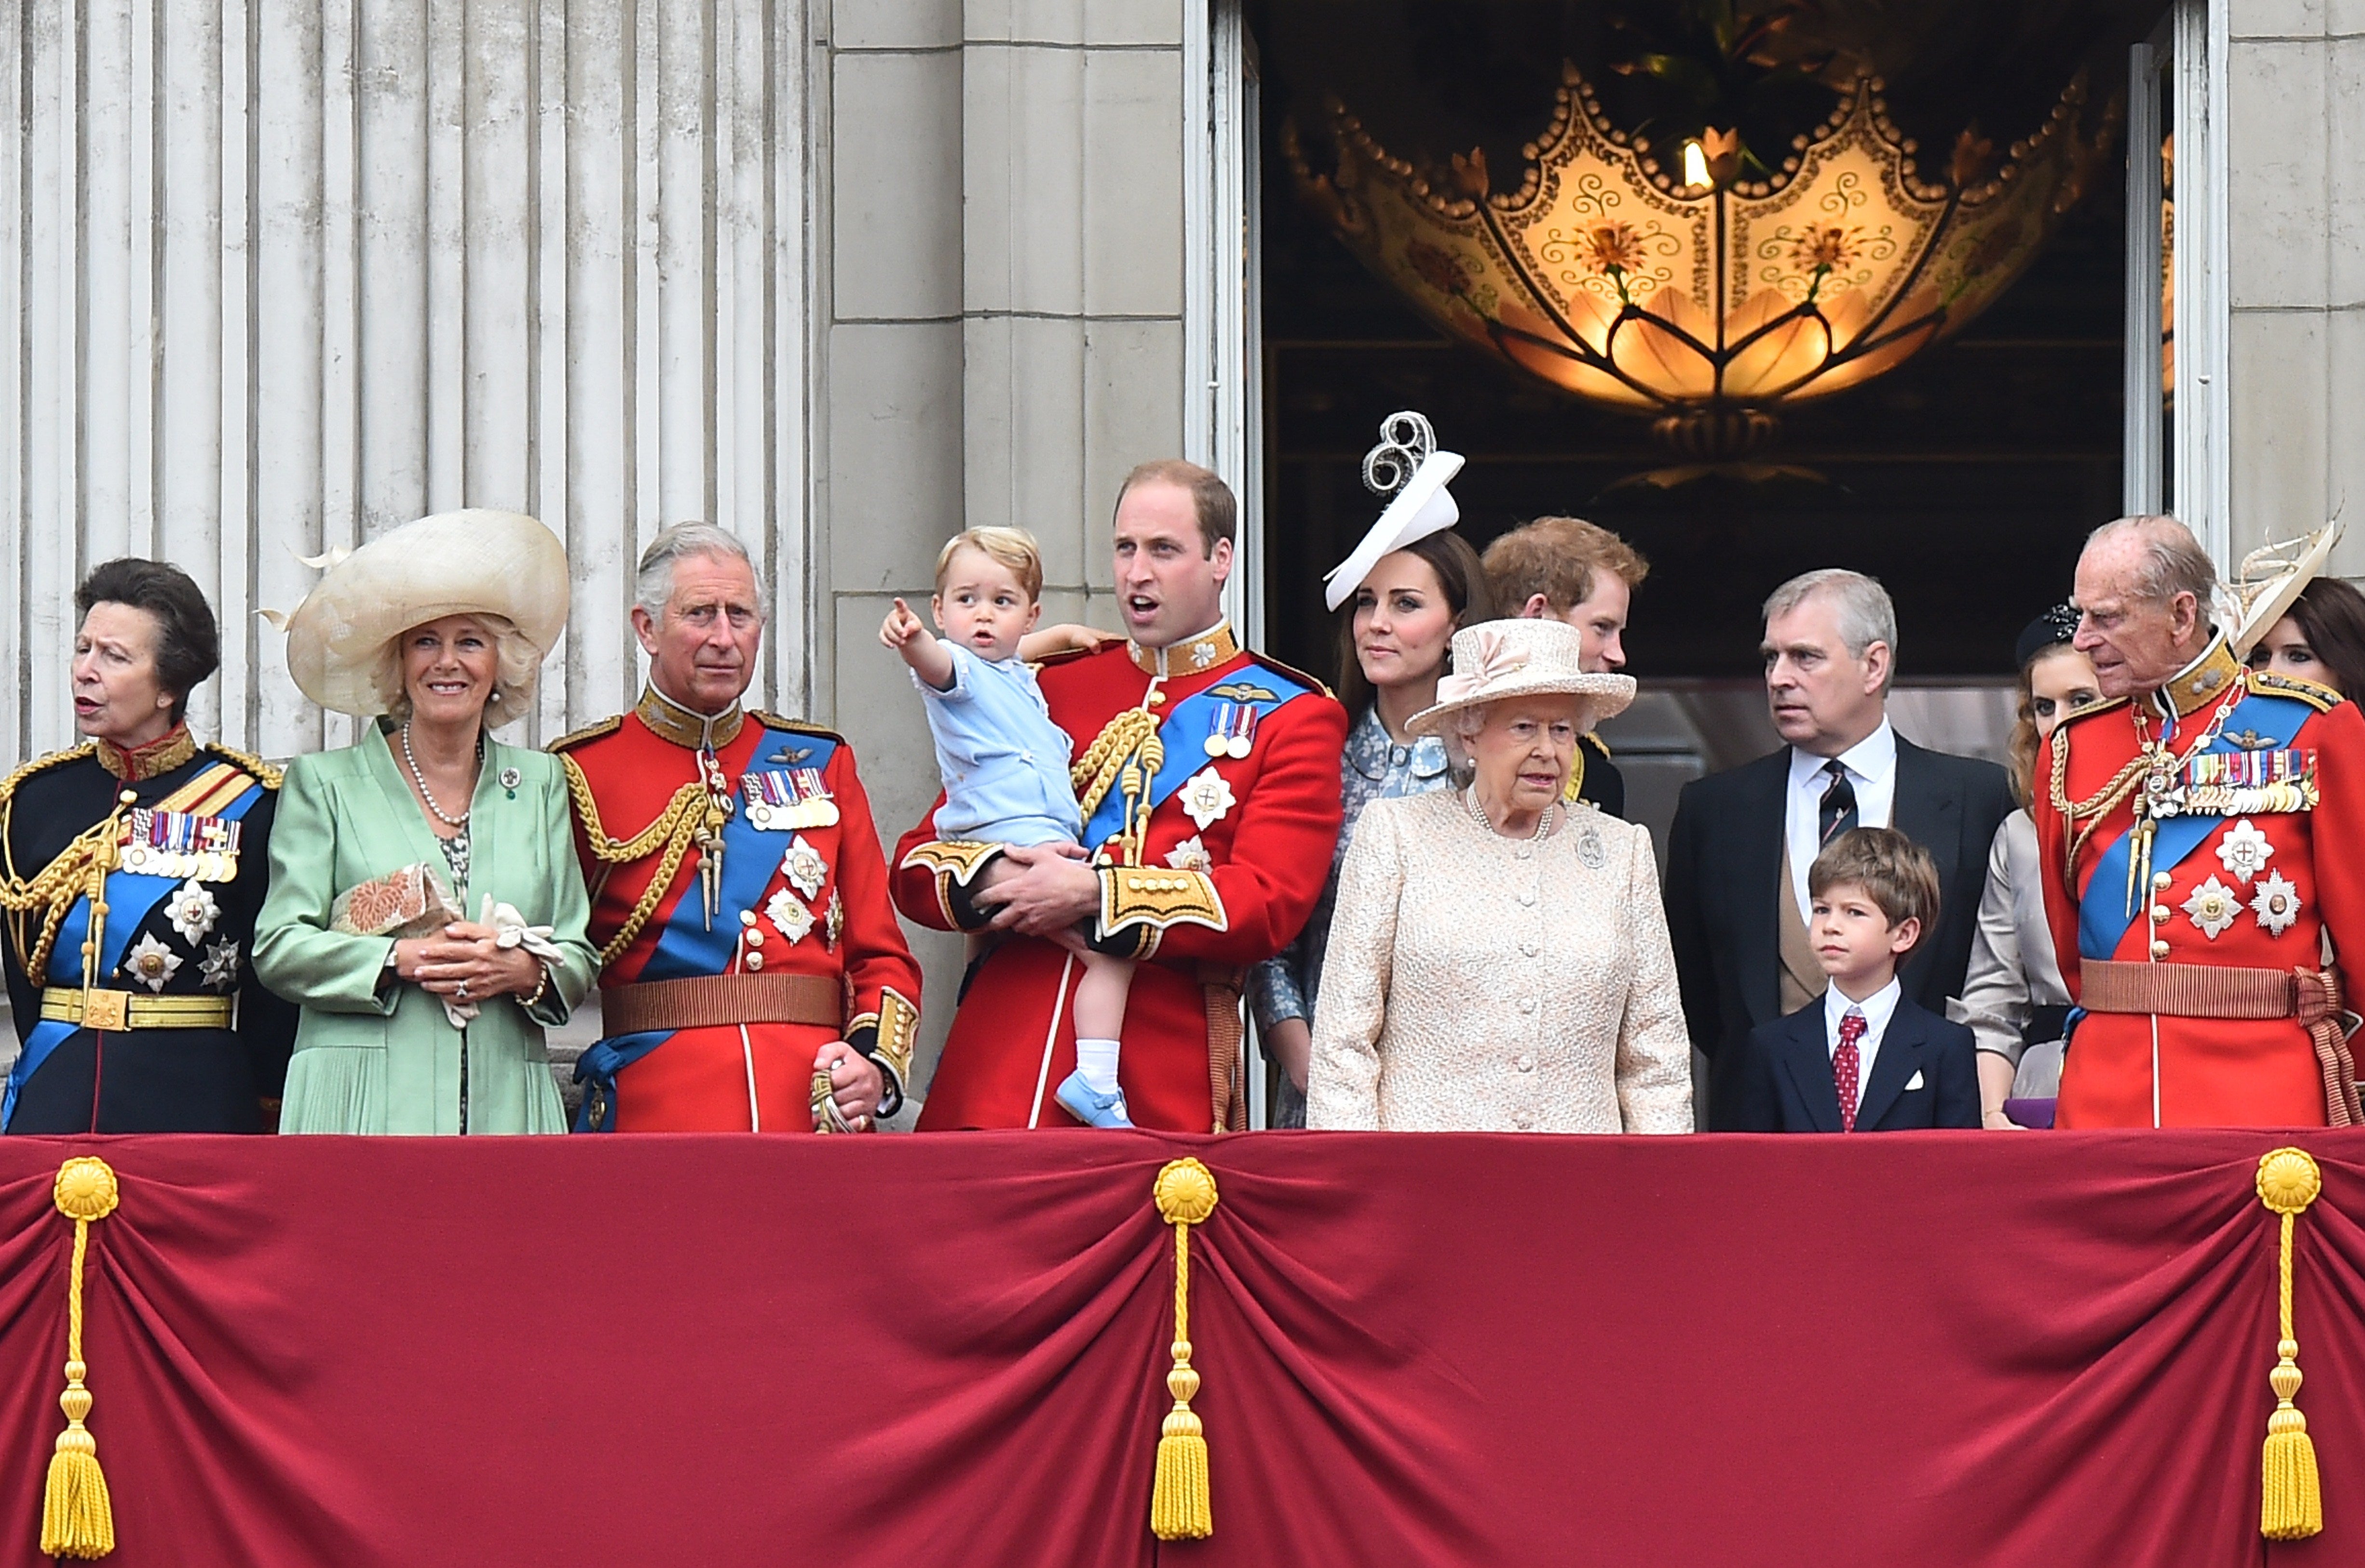 (L-R) Britain's Princess Anne, Princess Royal, Camilla, Duchess of Cornwall, Prince Charles, Prince of Wales, Prince William, Duke of Cambridge holding his son Prince George of Cambridge, Catherine, Duchess of Cambridge, Queen Elizabeth II, Prince Harry (back), Prince Andrew, Duke of York (back), James, Viscount Severn (front), Princess Beatrice of York (back), Prince Philip, Duke of Edinburgh and Princess Eugenie of York (back) stand on the balcony of Buckingham Palace waiting to view the fly-past during the Queen's Birthday Parade, 'Trooping the Colour,' in London, 2015